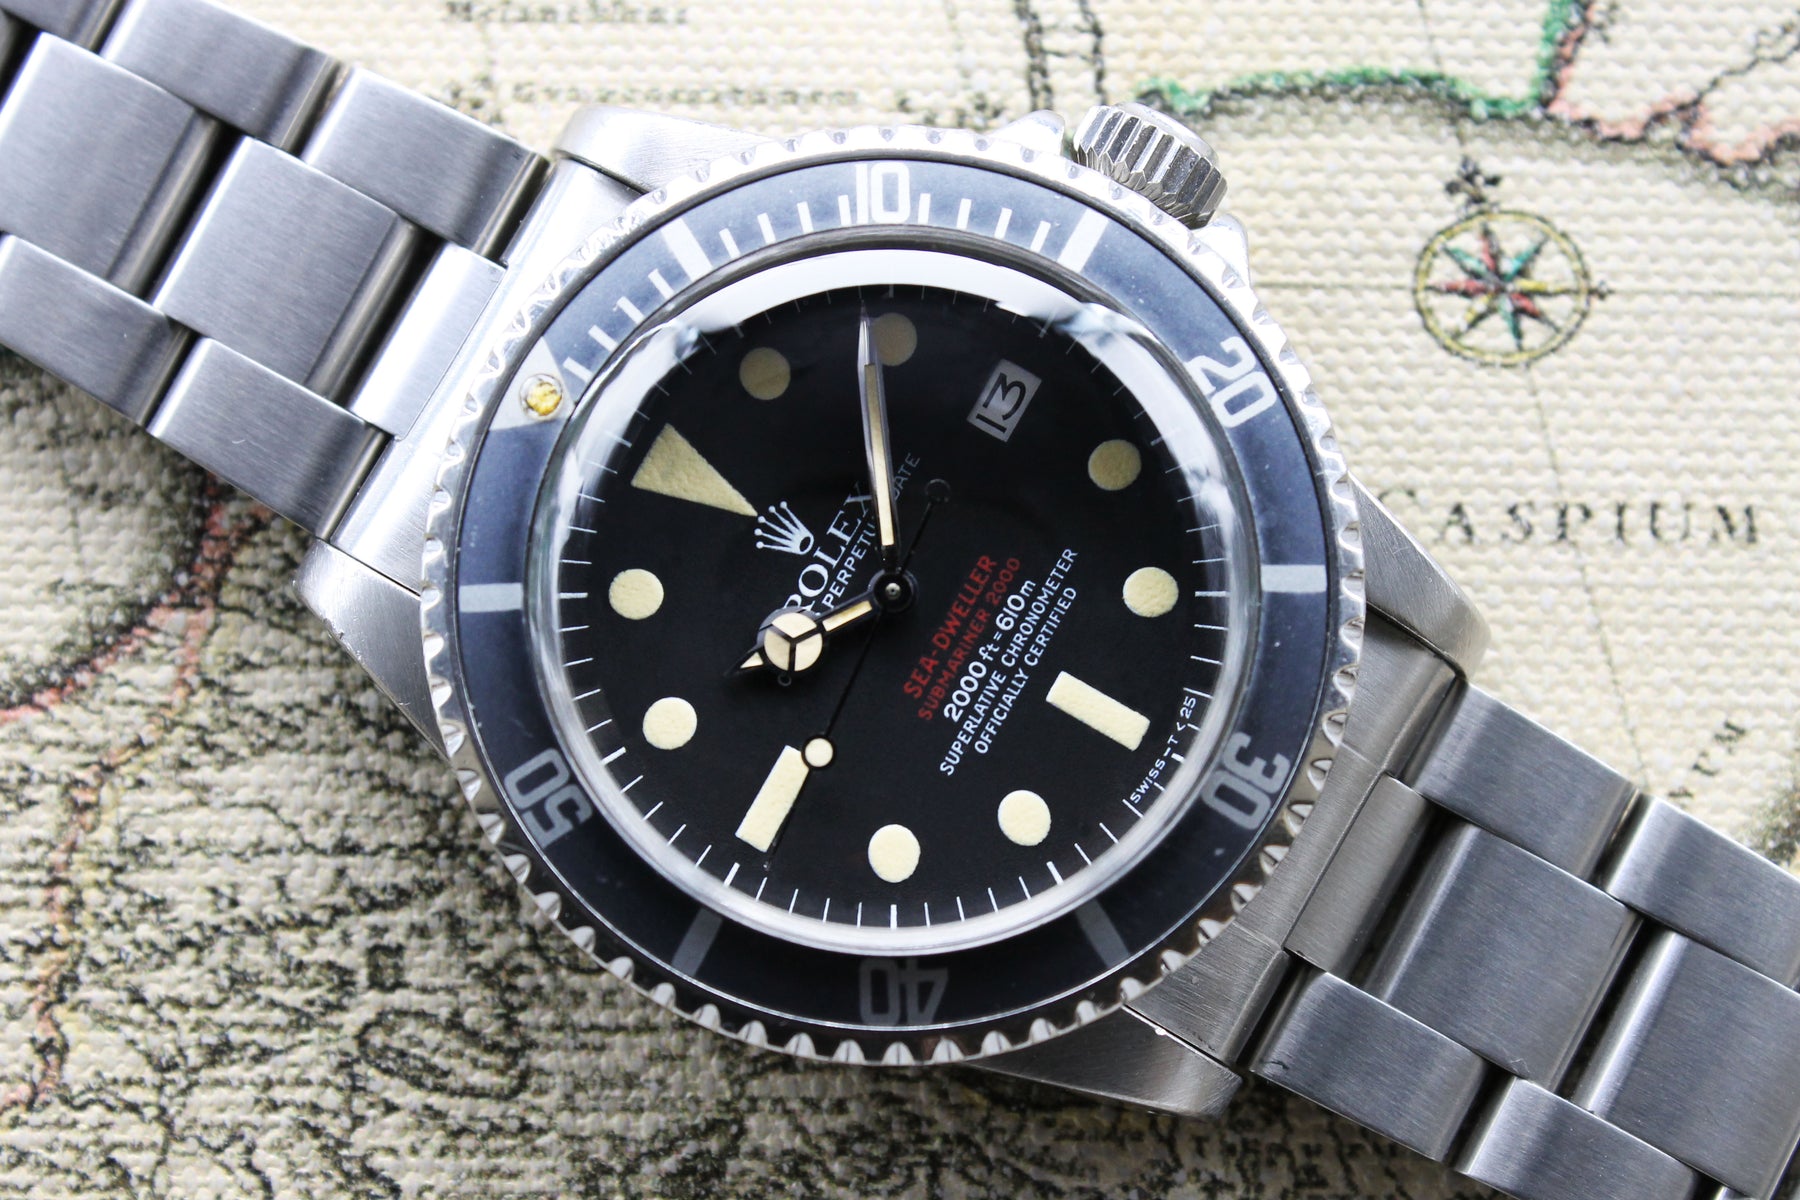 Rolex Double Red Sea Dweller MK4 Ref. 1665 Year 1975 - Price on Request